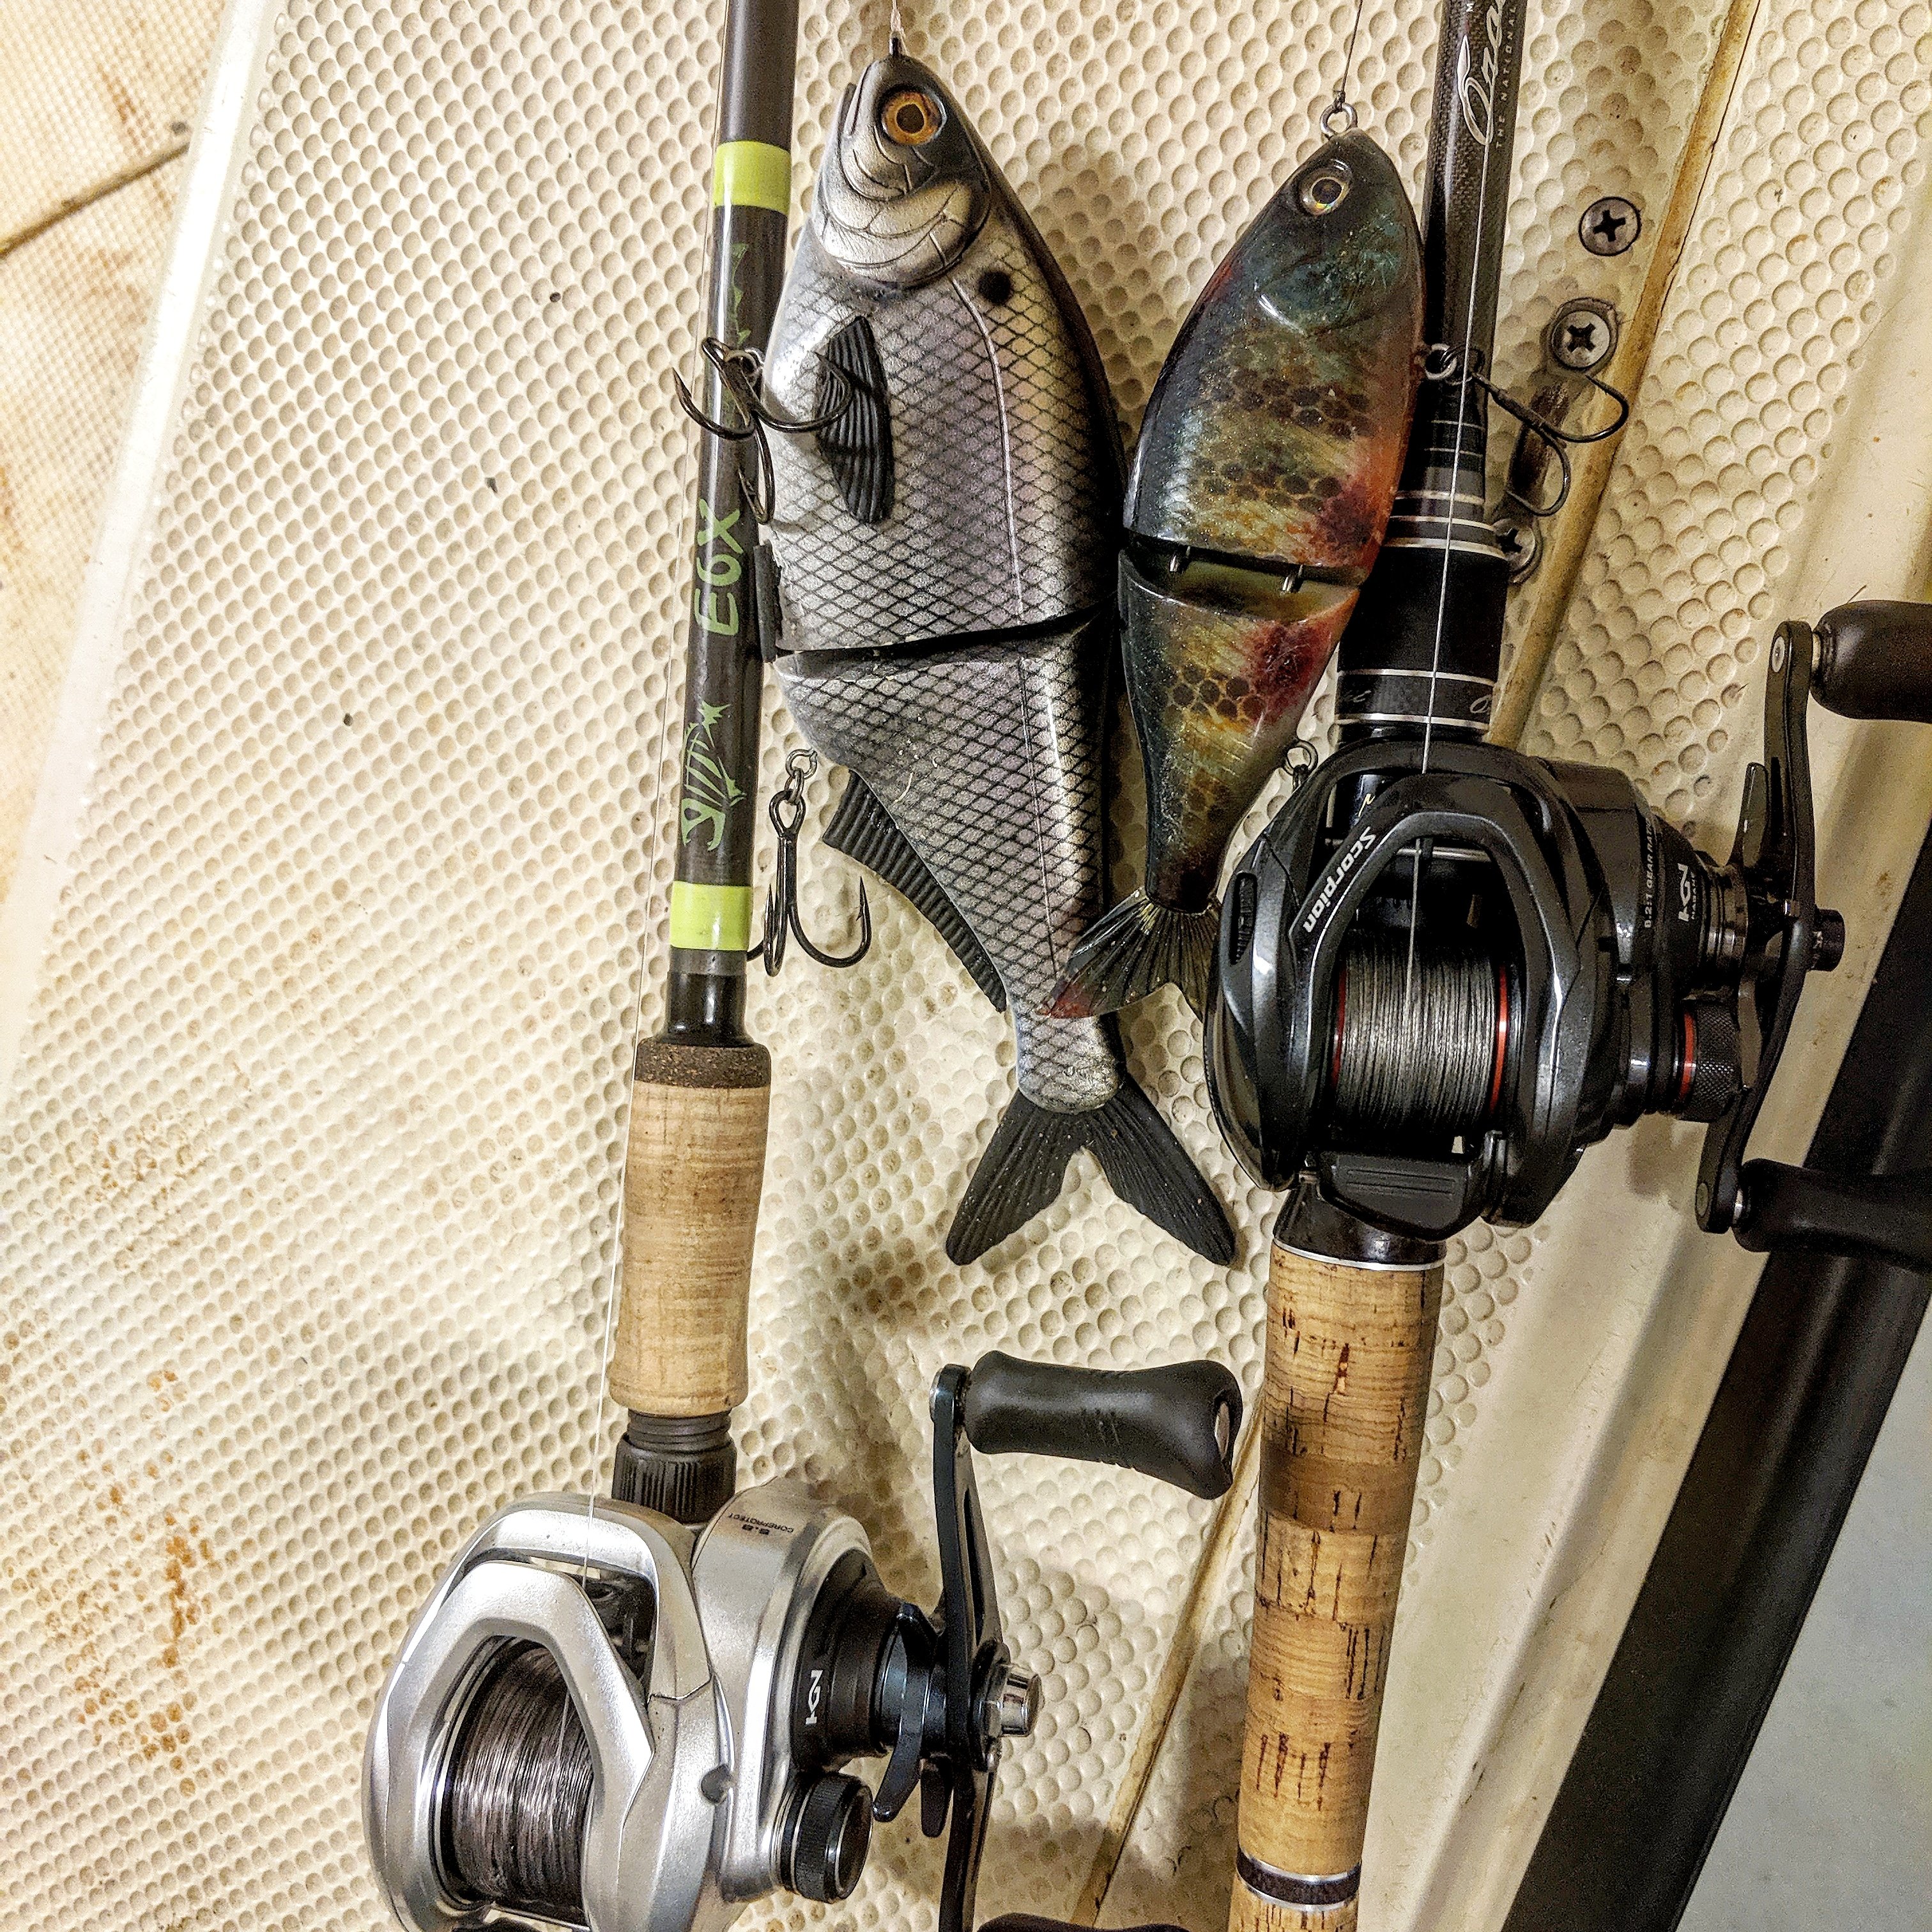 I'm looking for a good swimbait reel what would you recomend